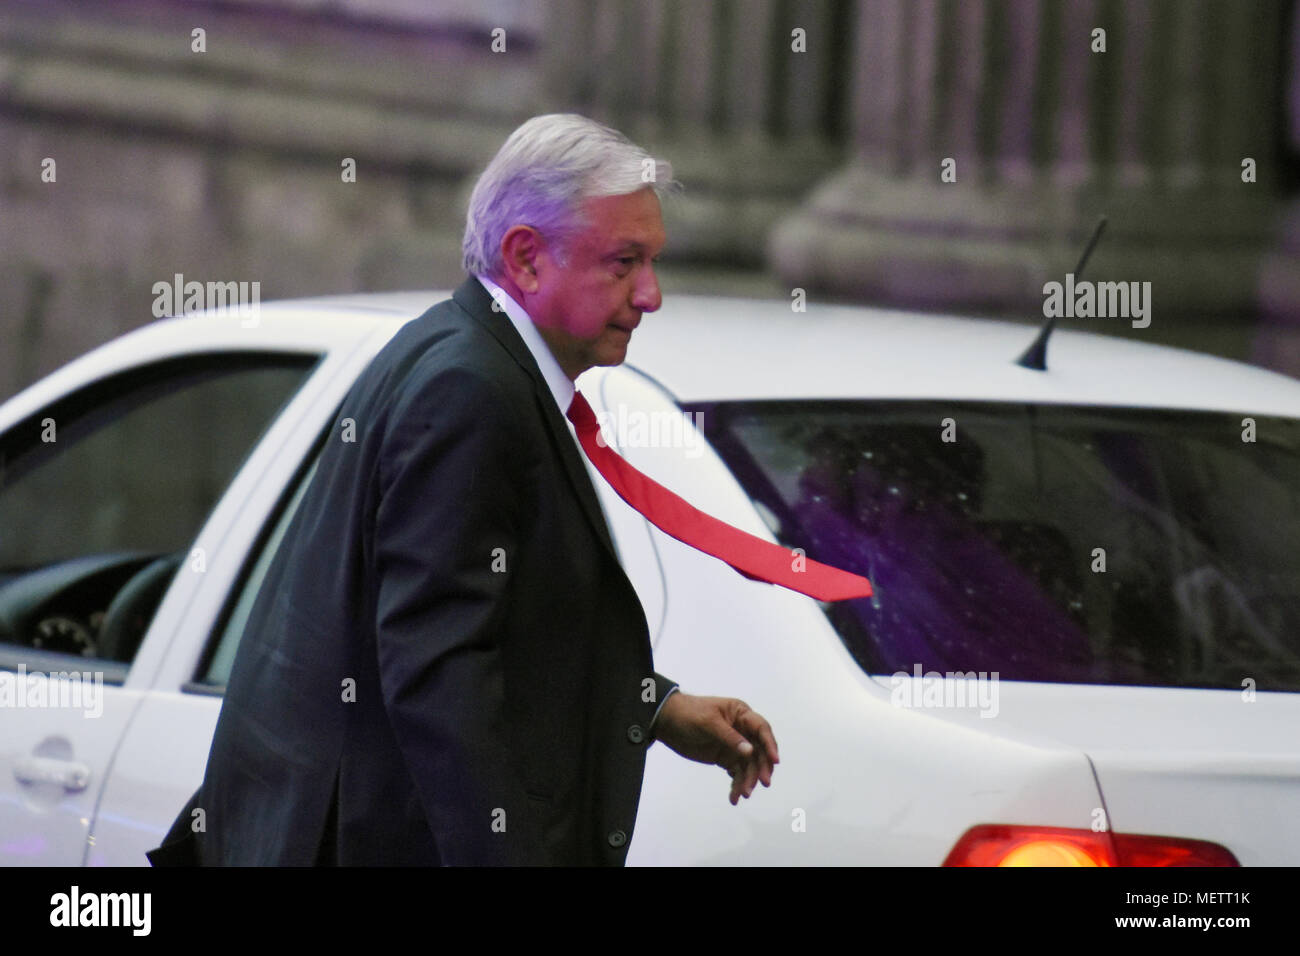 Candidate for Mexico's president  of Morena Political party Andres Manuel Lopez Obrador  attends the  First Debate of candidates for the Mexico's presidential election held  at Palace of Mining. Stock Photo